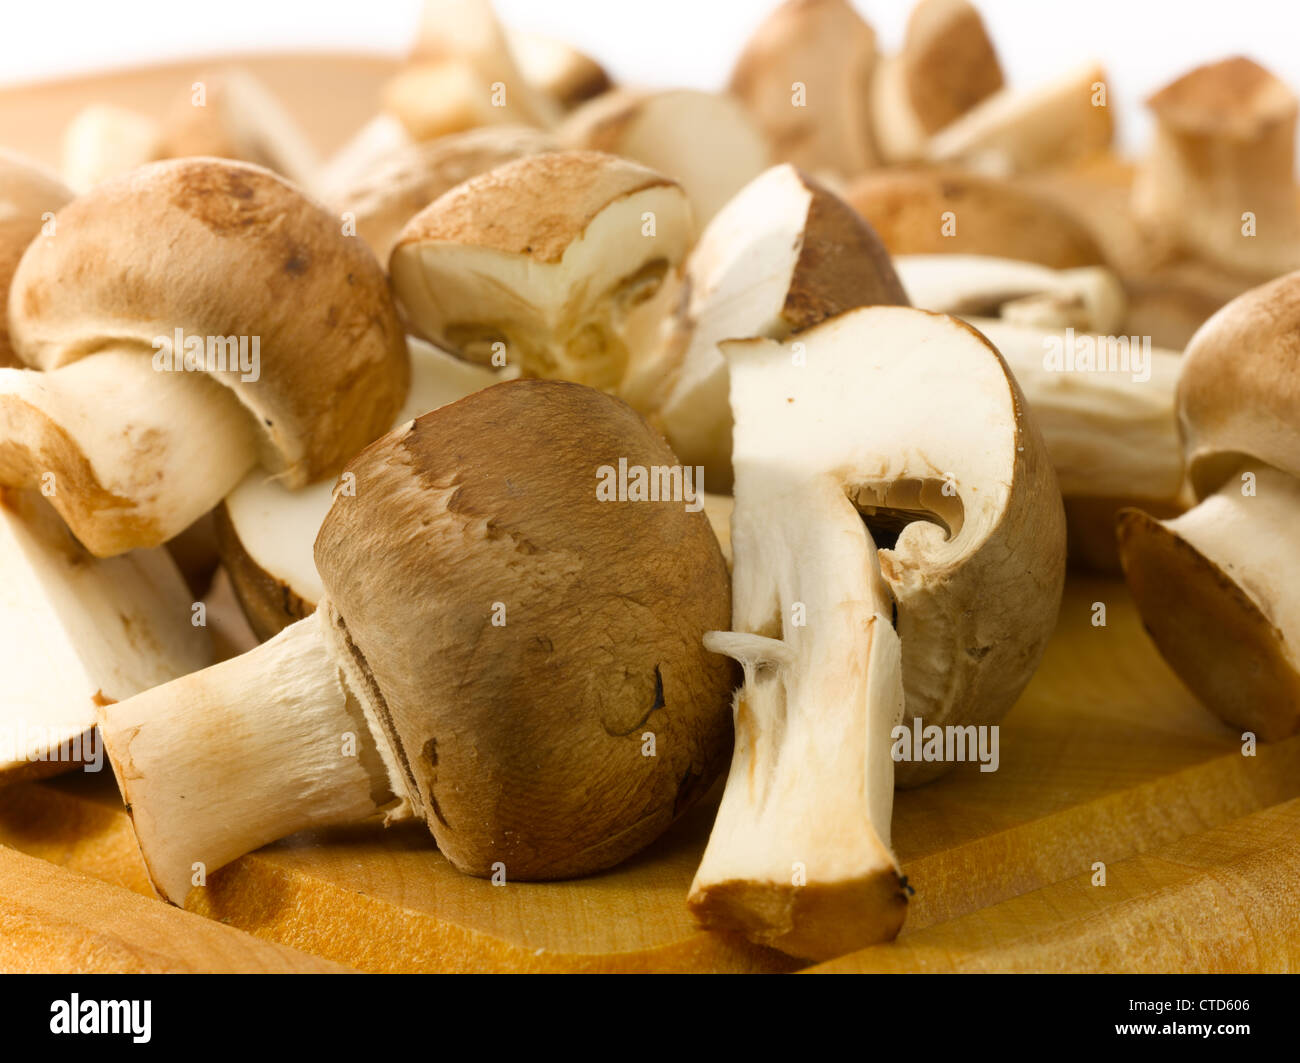 Close-up of champignons cut in half on a wooden cutting board. Stock Photo